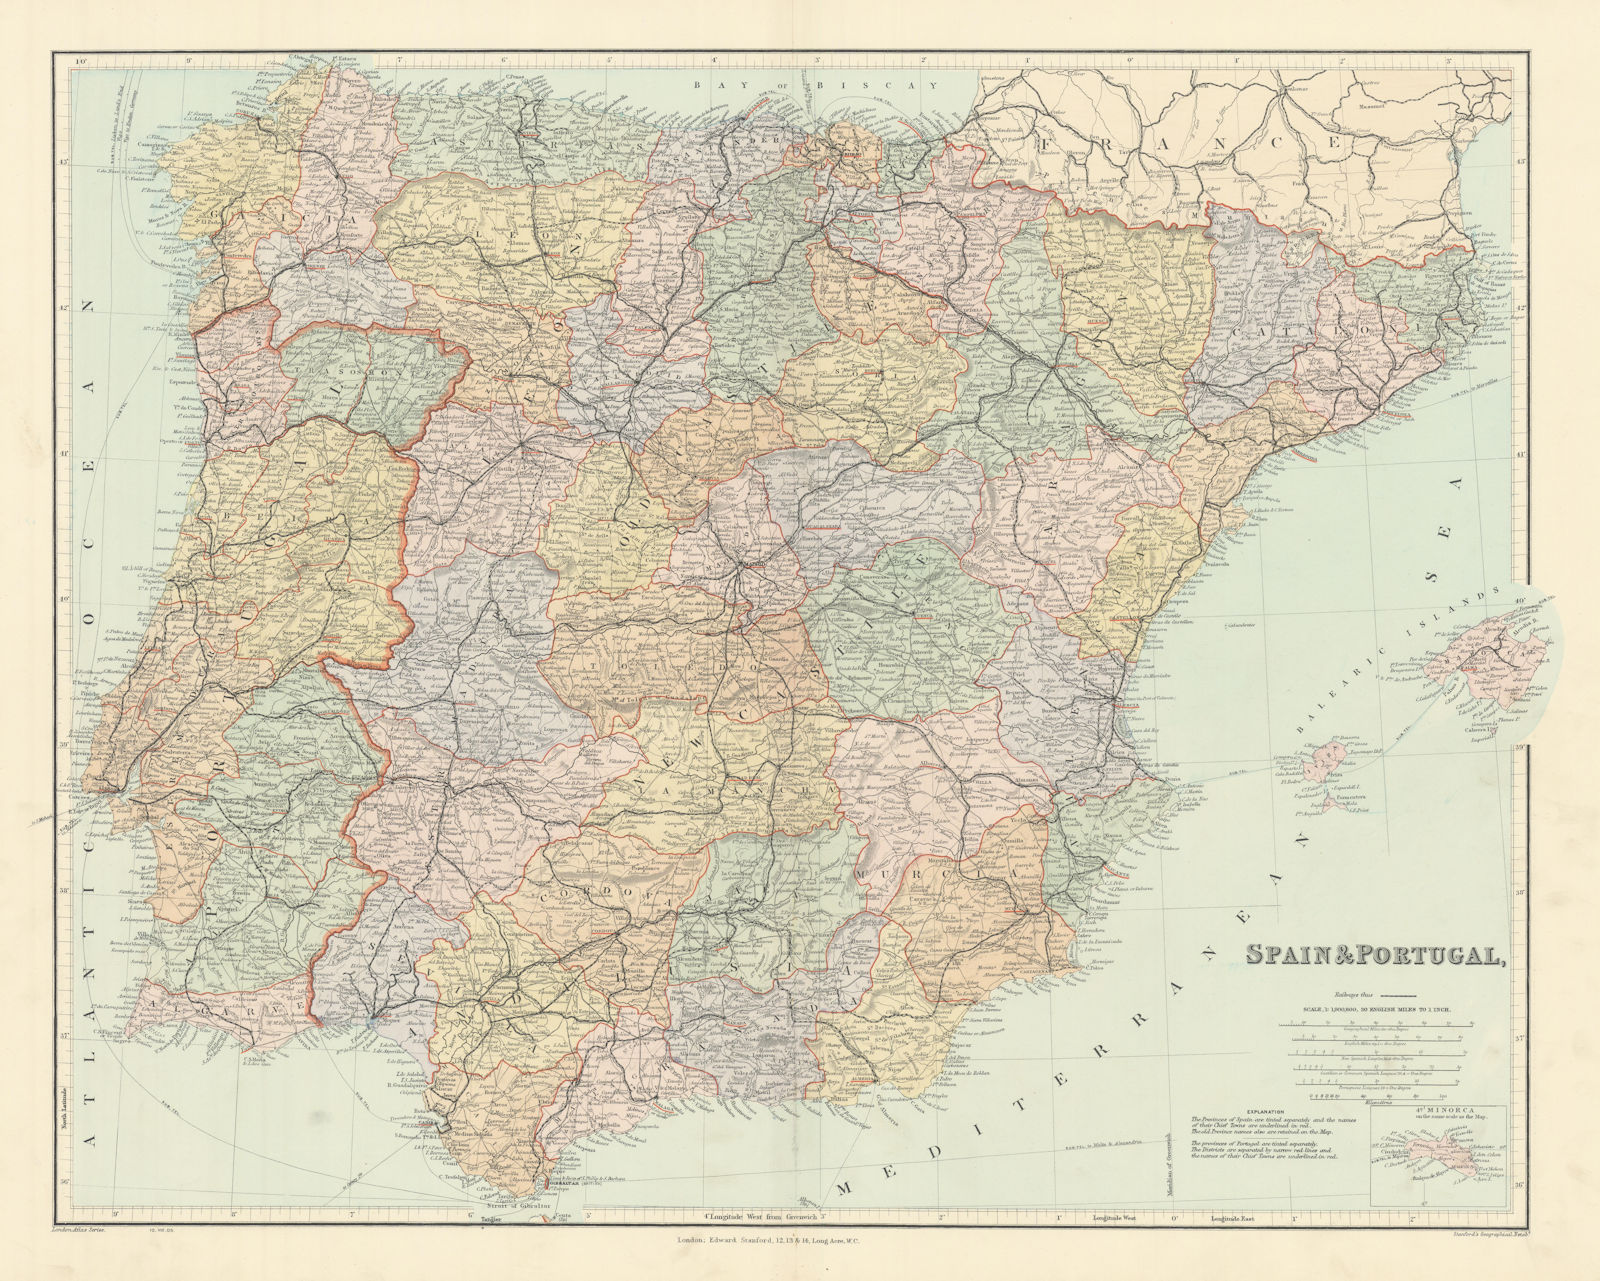 Associate Product Spain & Portugal. Iberia. Railways. Large 52x65cm. STANFORD 1904 old map